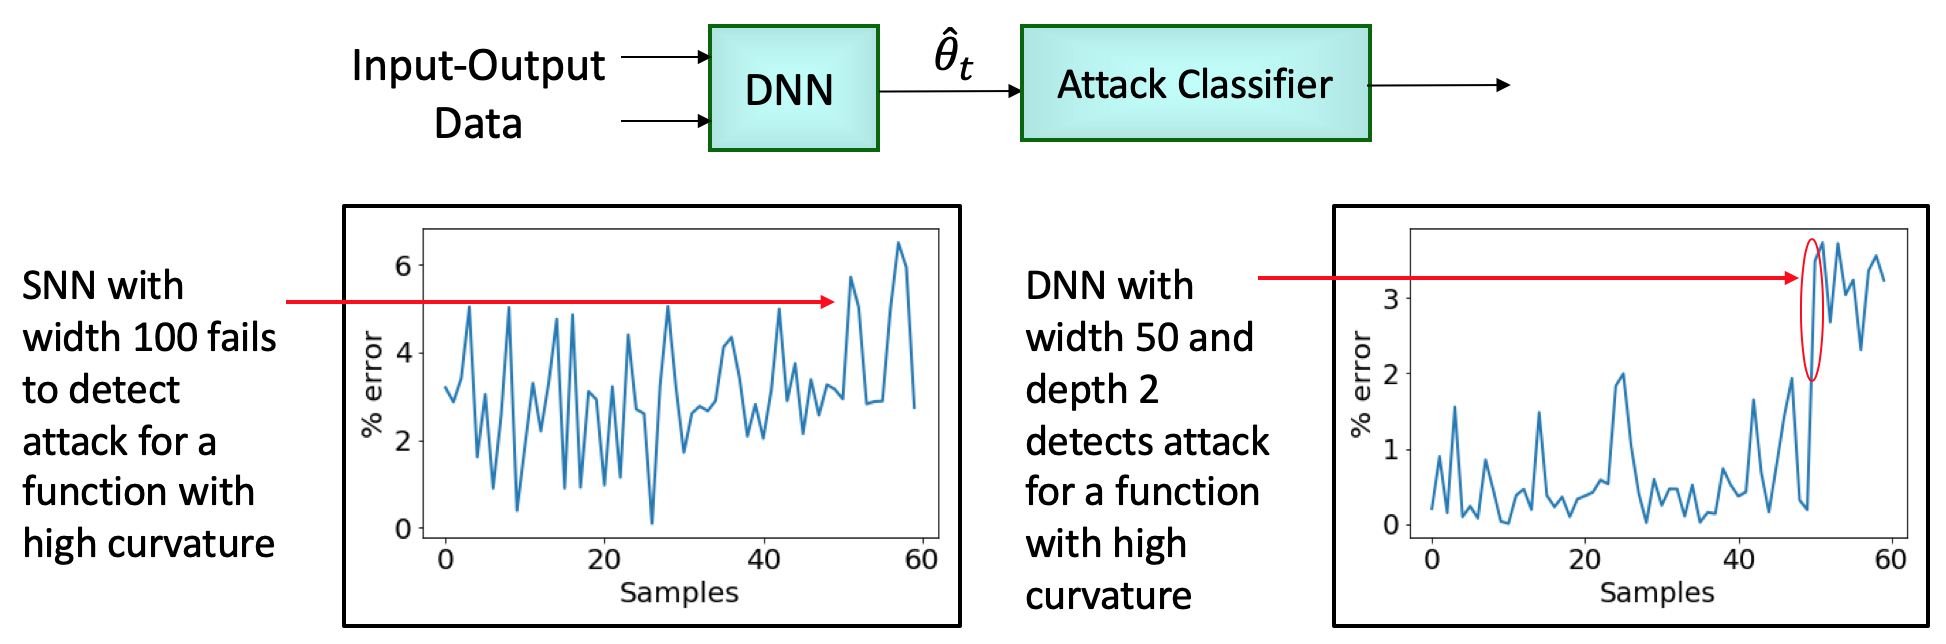 Resilience to Cyber-attacks using Deep Neural Networks (DNN)